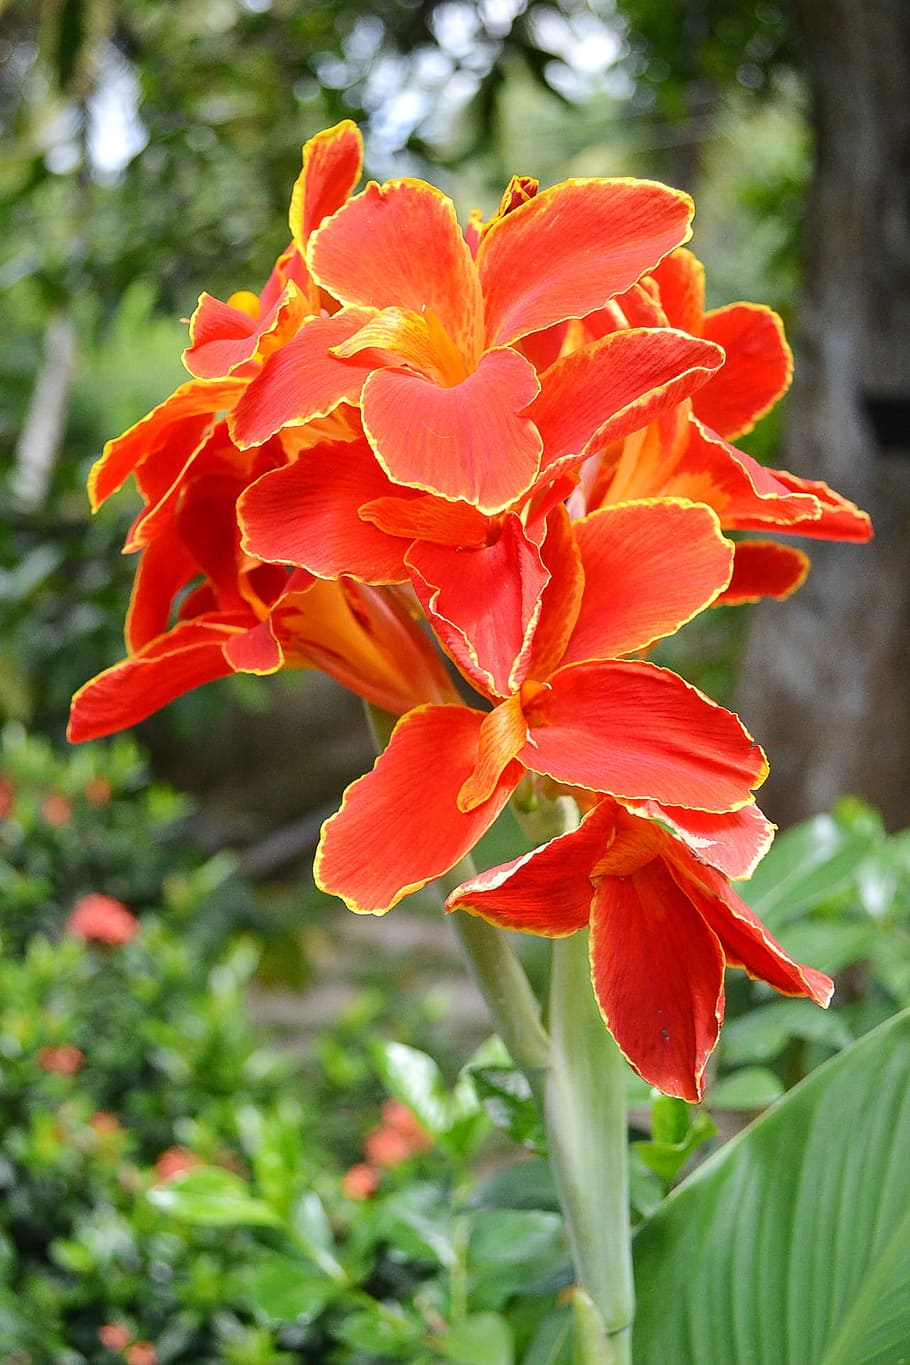 Canna, Flower, red flowers, blossoms, garden, butterfly, nature